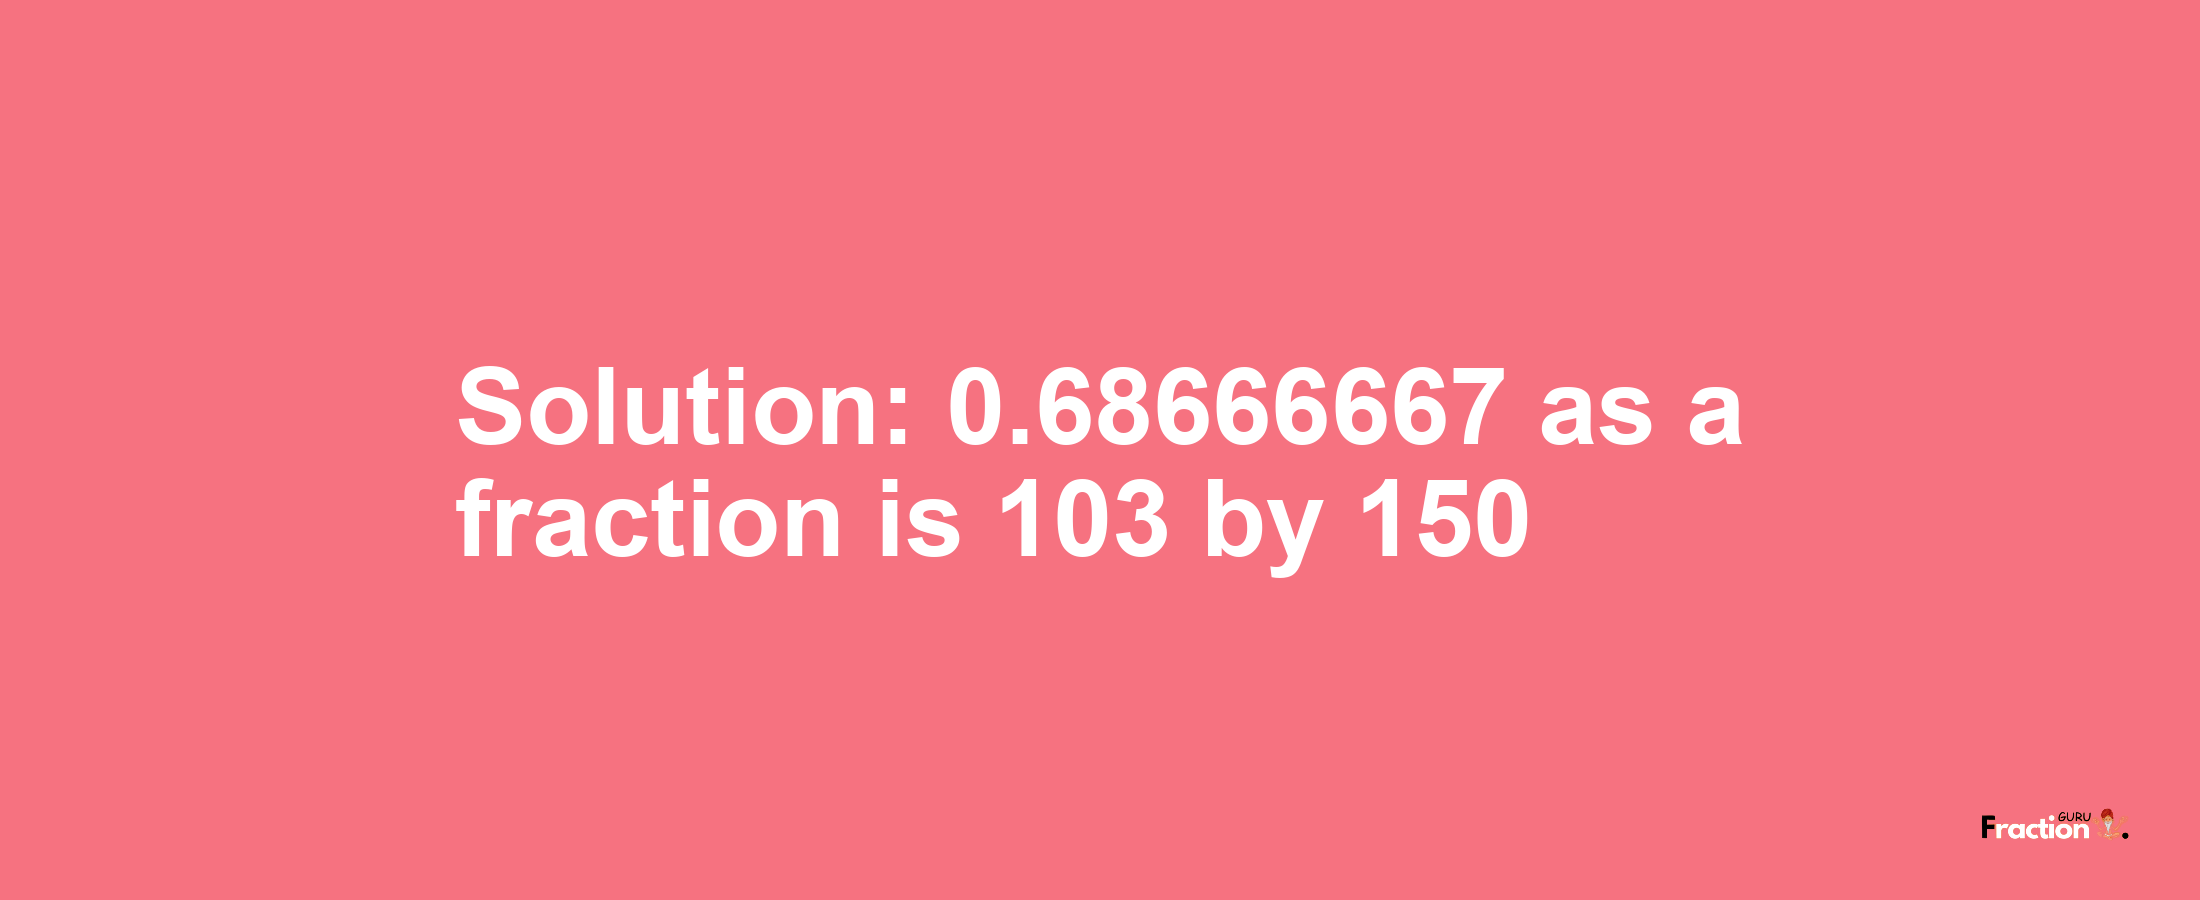 Solution:0.68666667 as a fraction is 103/150